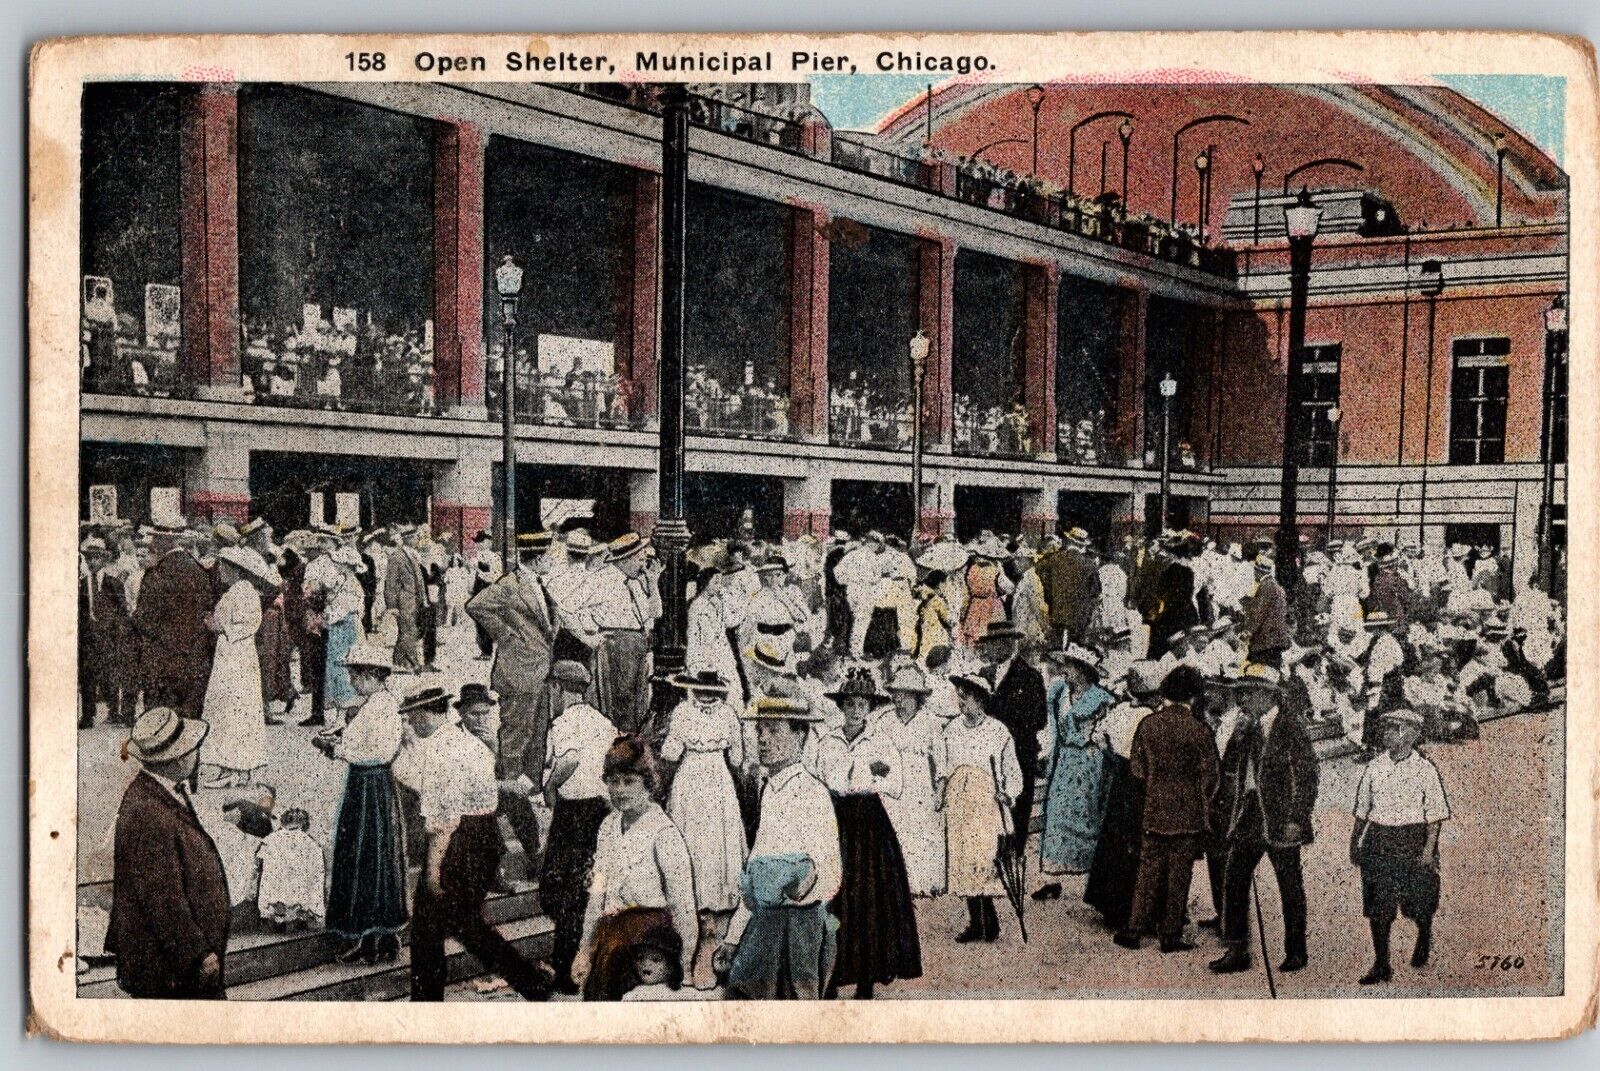 C1915 New Municipal Pier Open Shelter Crowded People Chicago IL Postcard